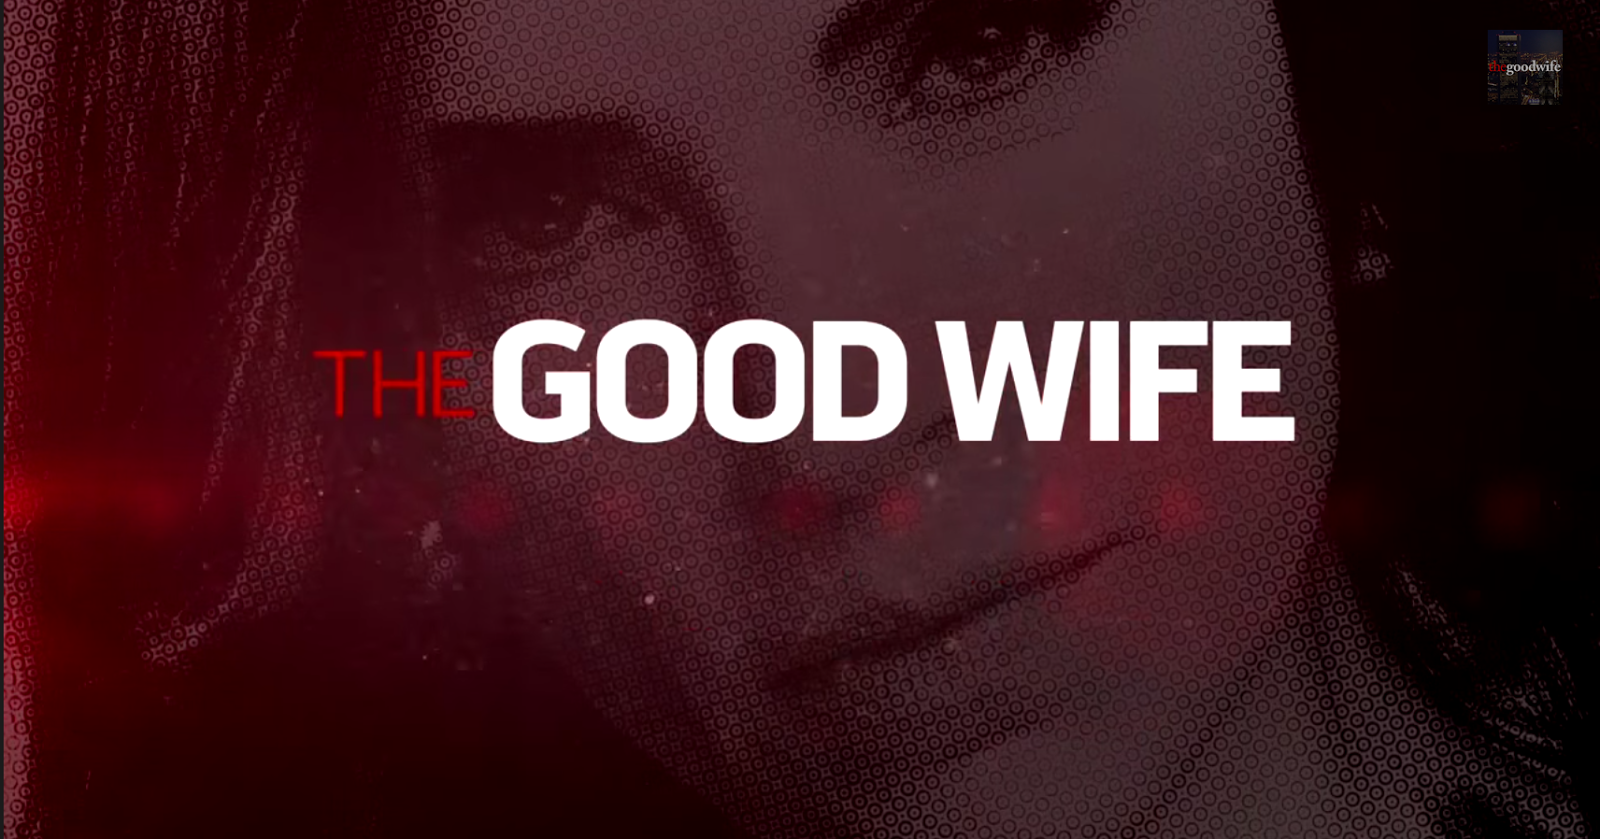 The Good Wife - Oppo Research - Review - "Irony is Dead"